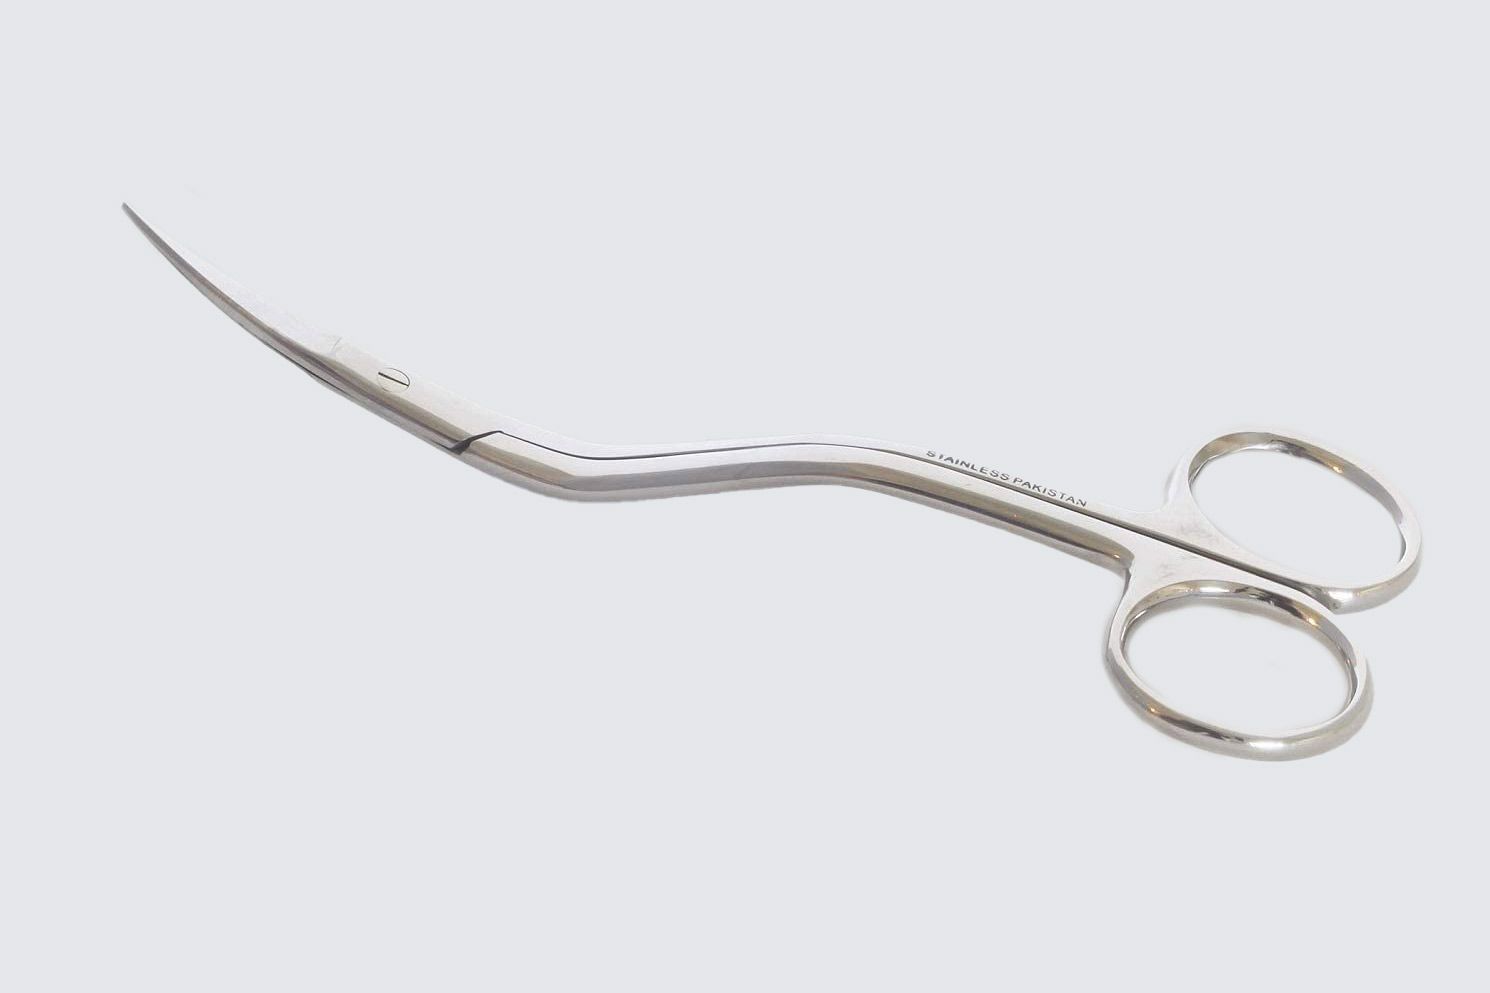 mazbot curved embroidery scissors